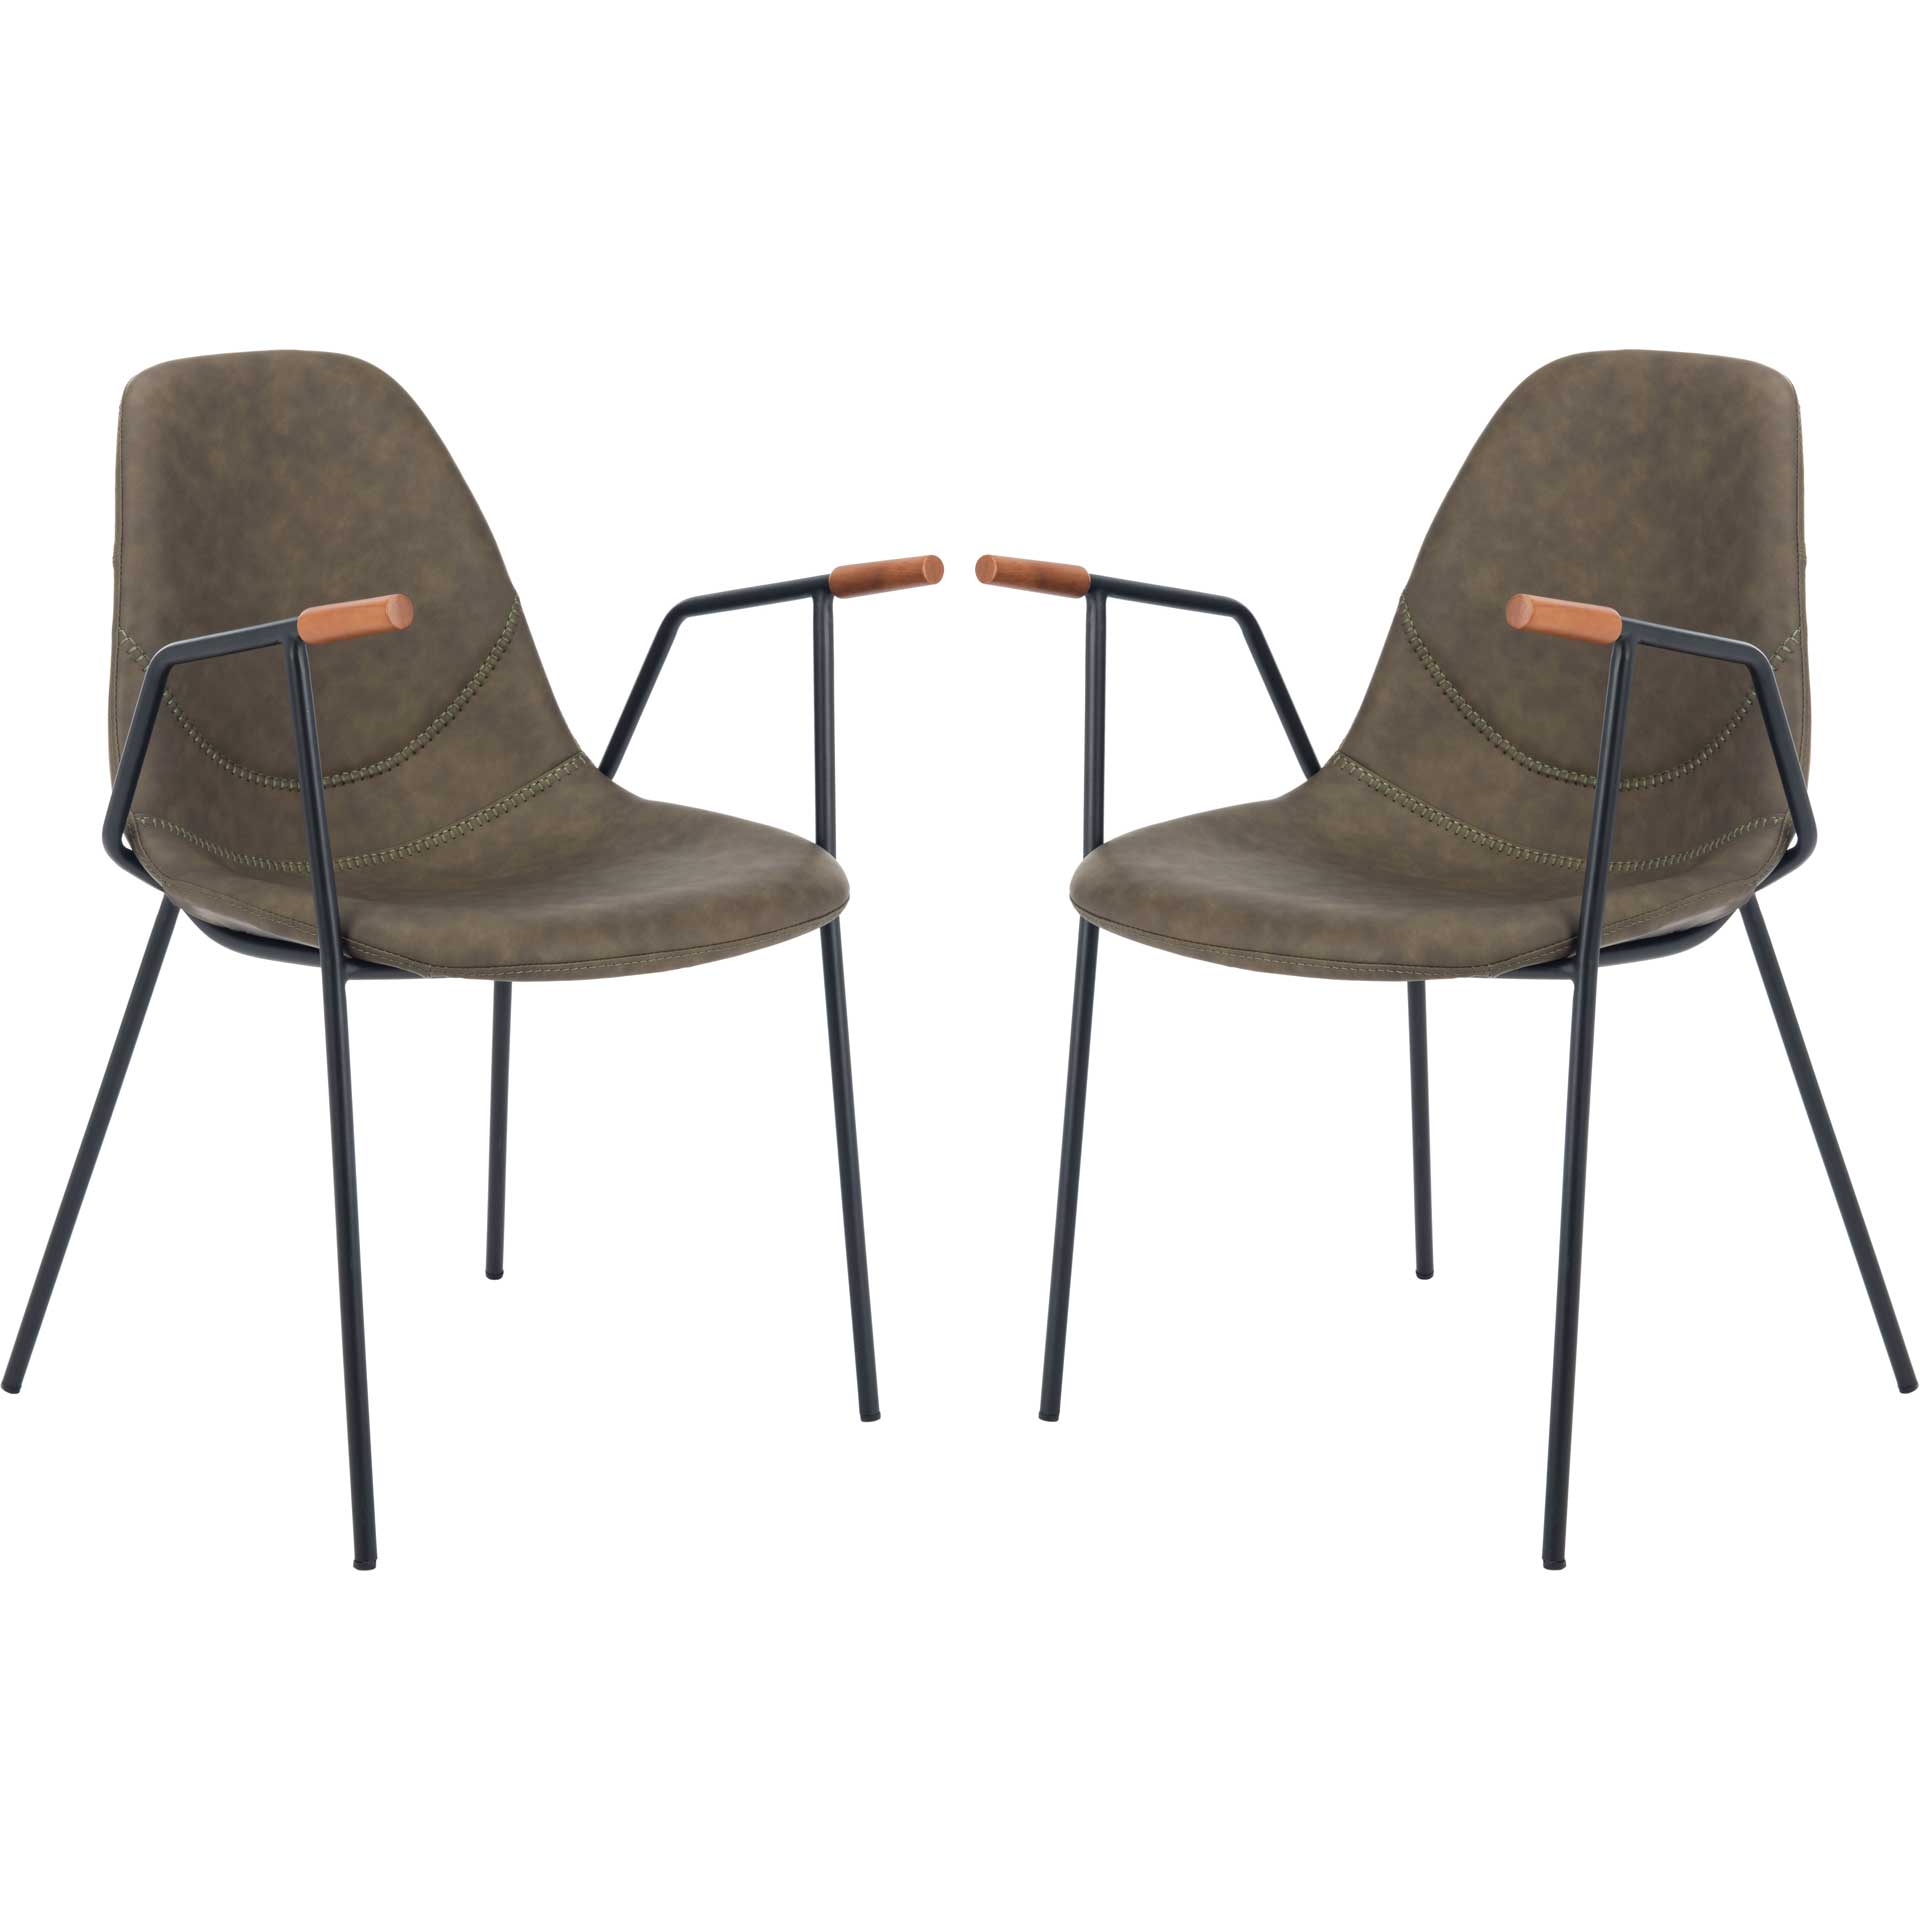 Taos Mid Century Dining Chair Olive (Set of 2)